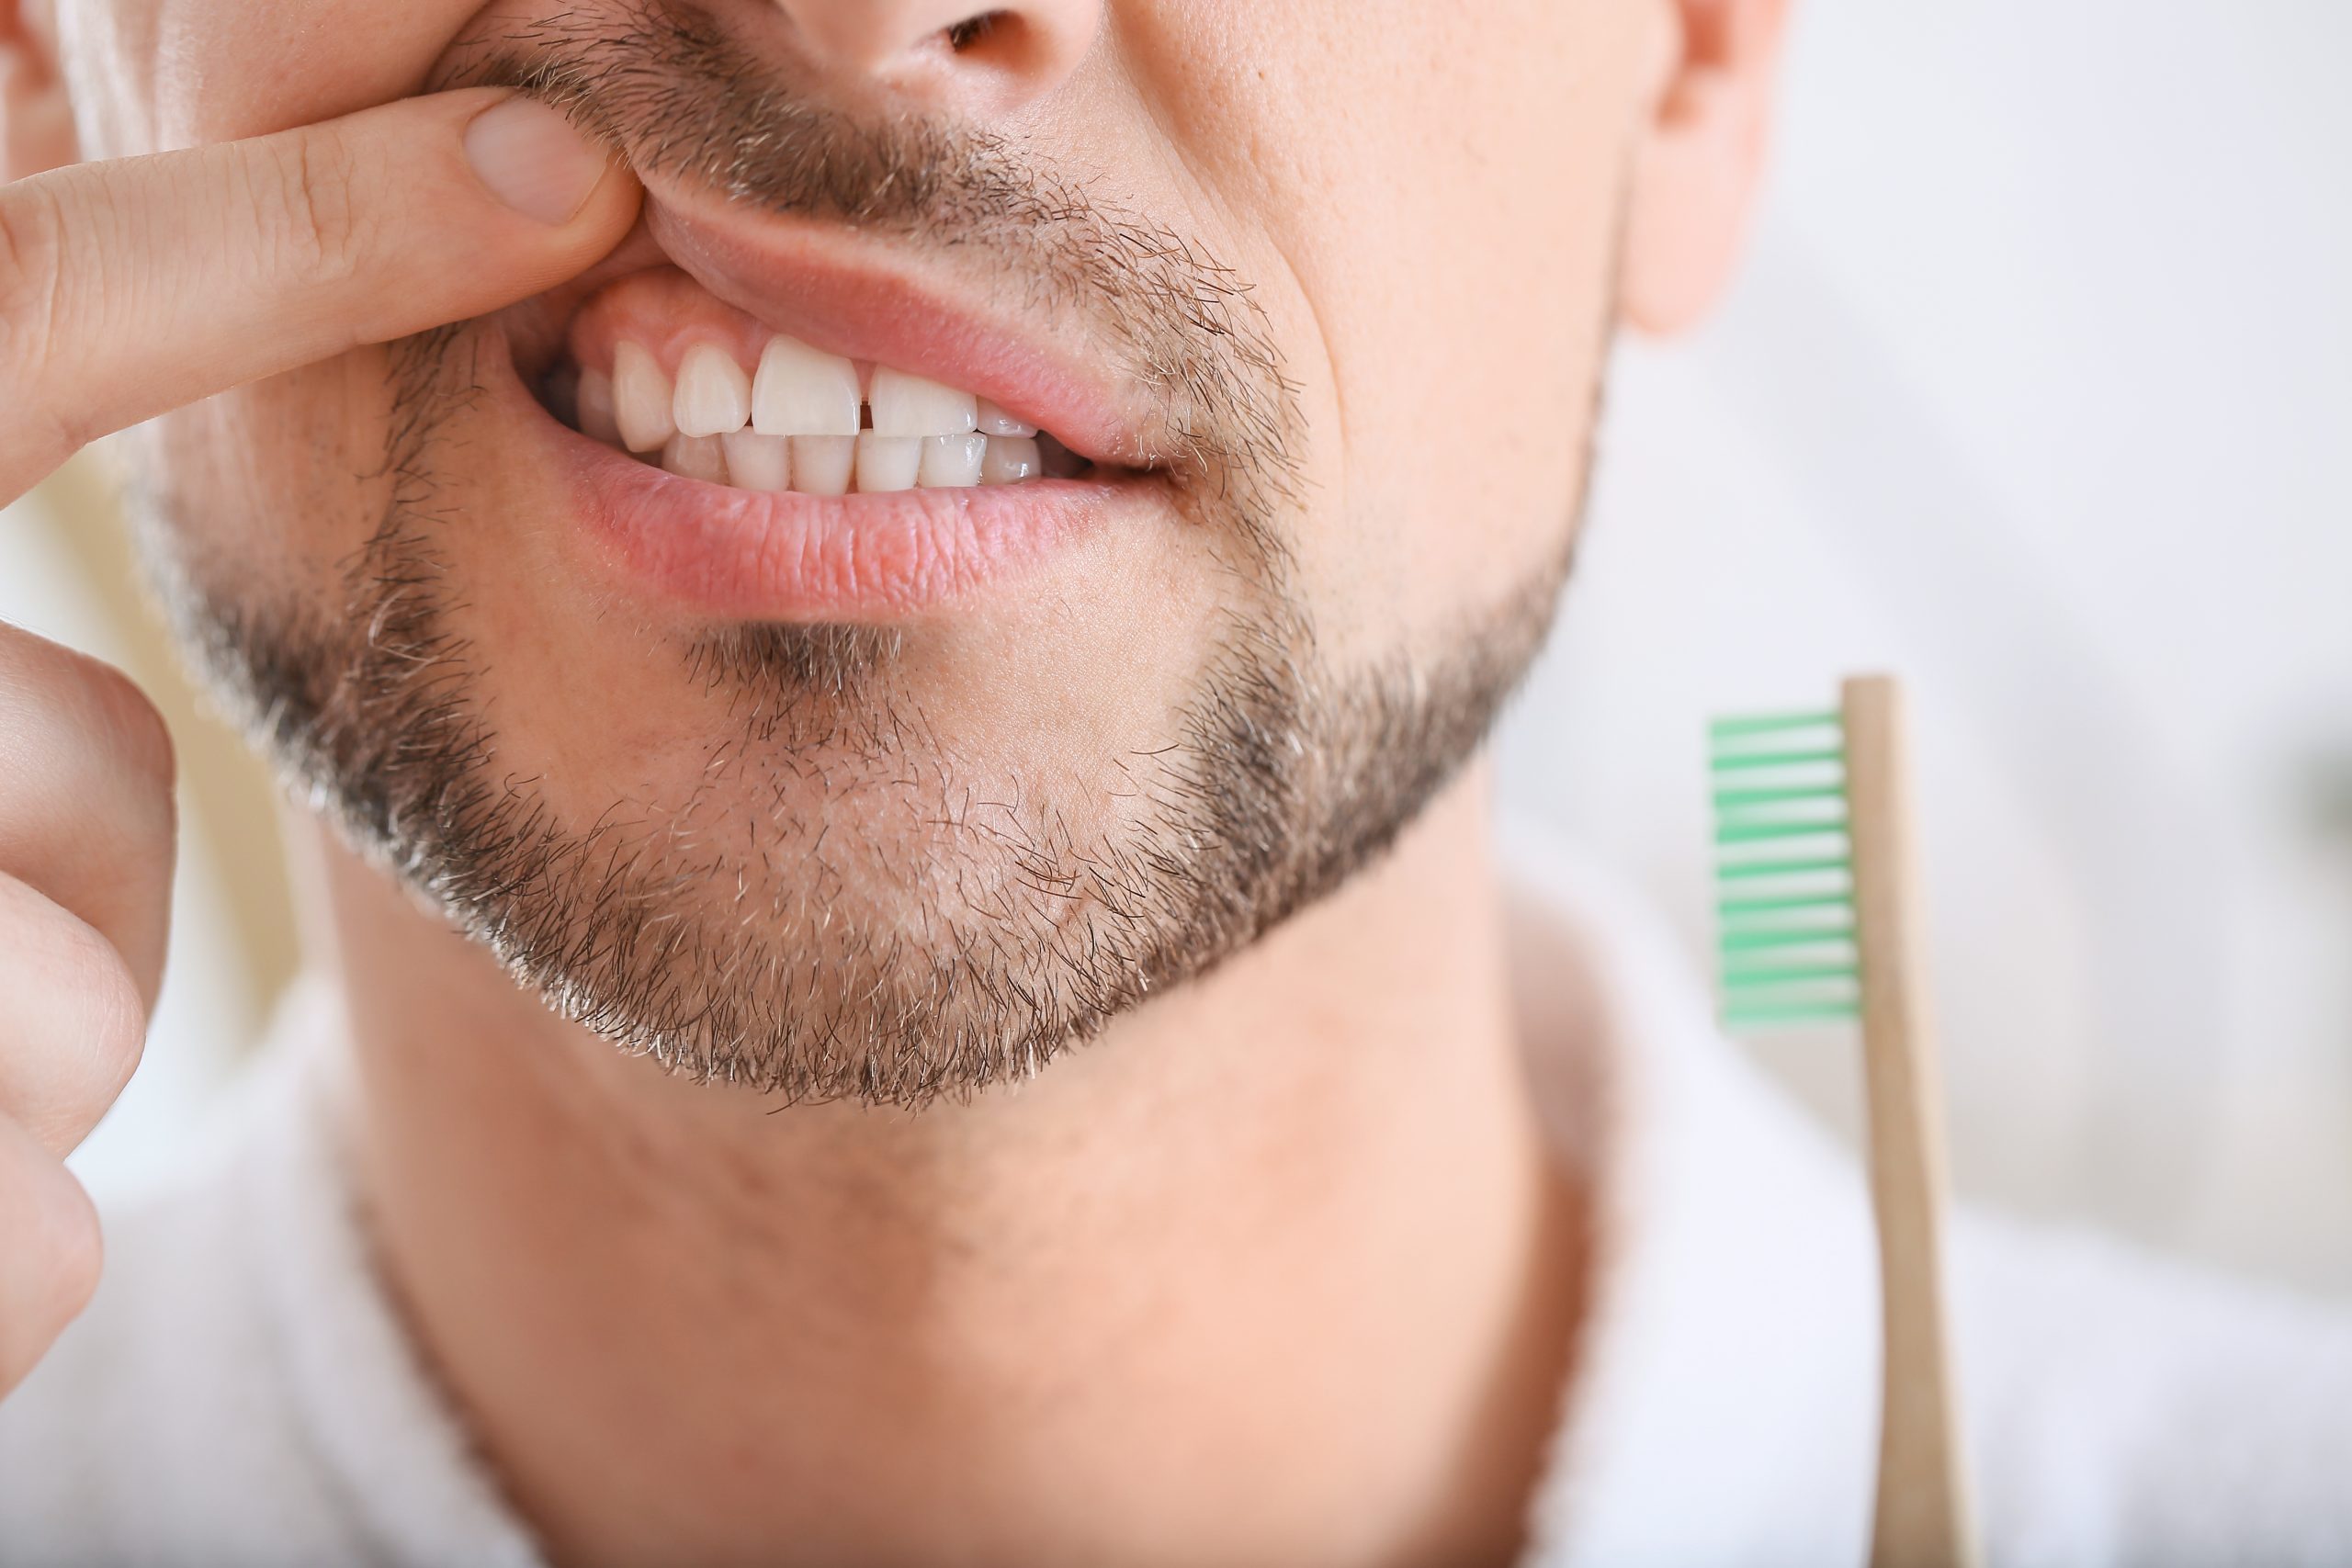 How does alcohol affect the mouth? It can contribute to gum disease, as this man holding a toothbrush while pointing to his inflamed gum knows.